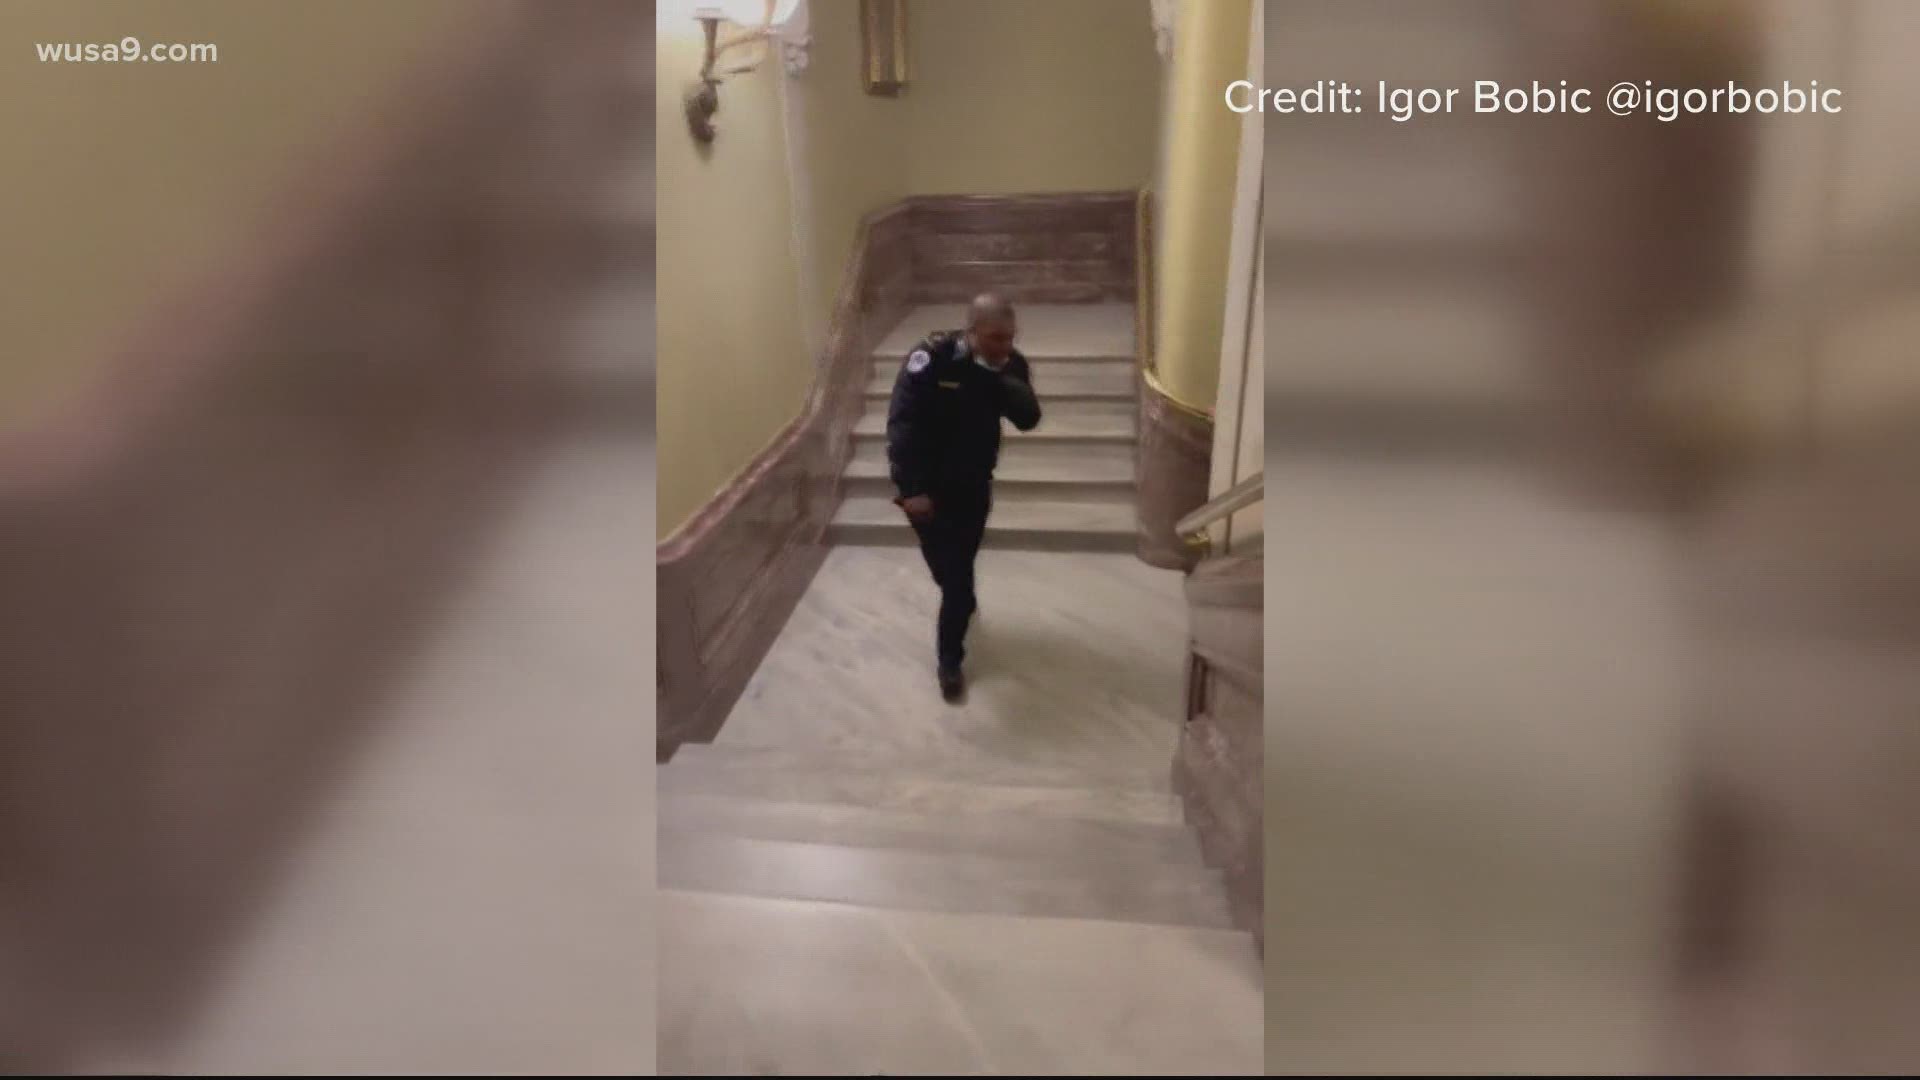 An act of heroism from last week's siege at the Capitol is being recognized by lawmakers.